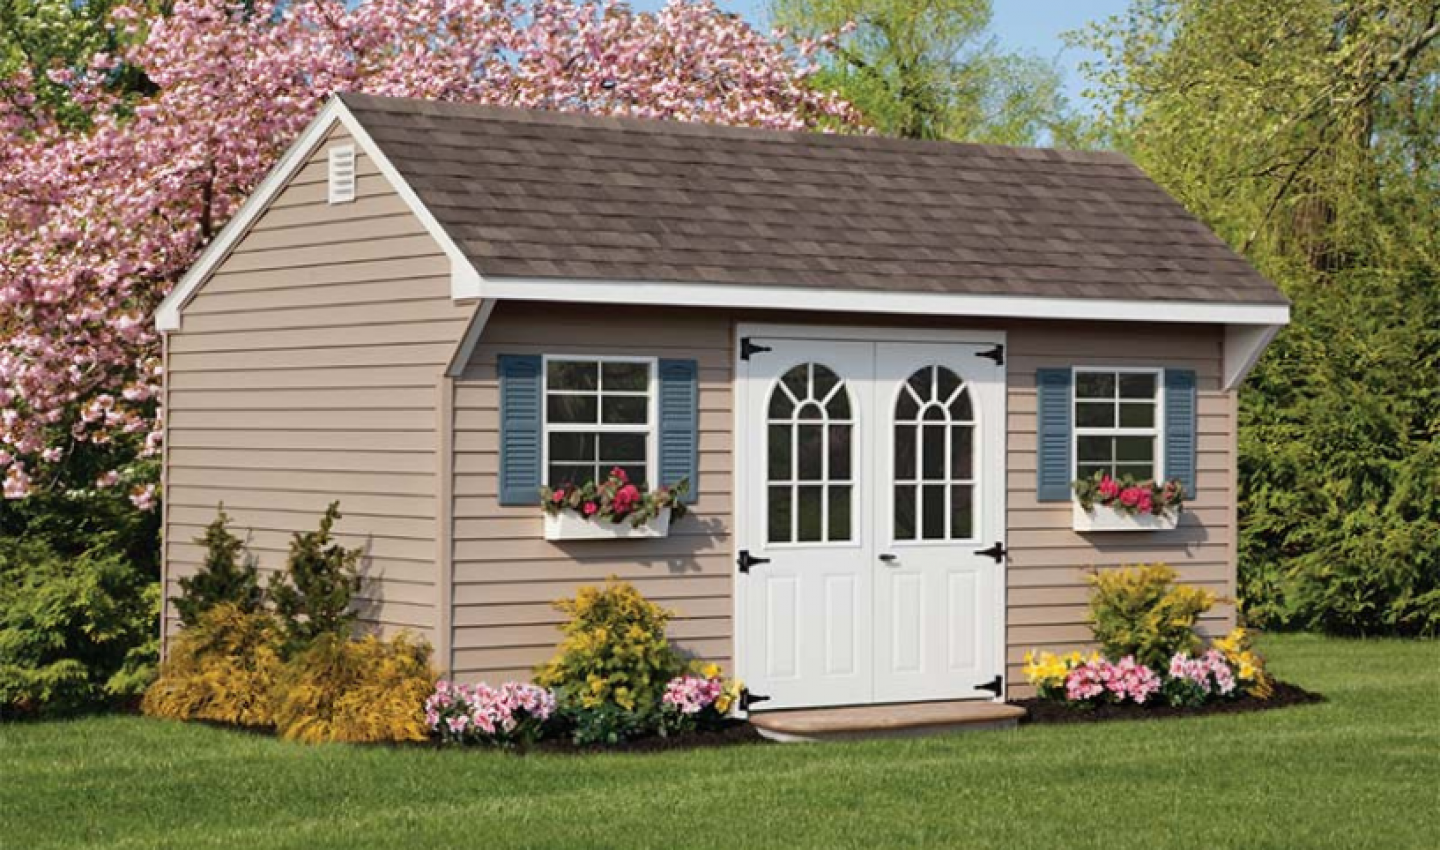 Sheds for Sale in Monmouth County